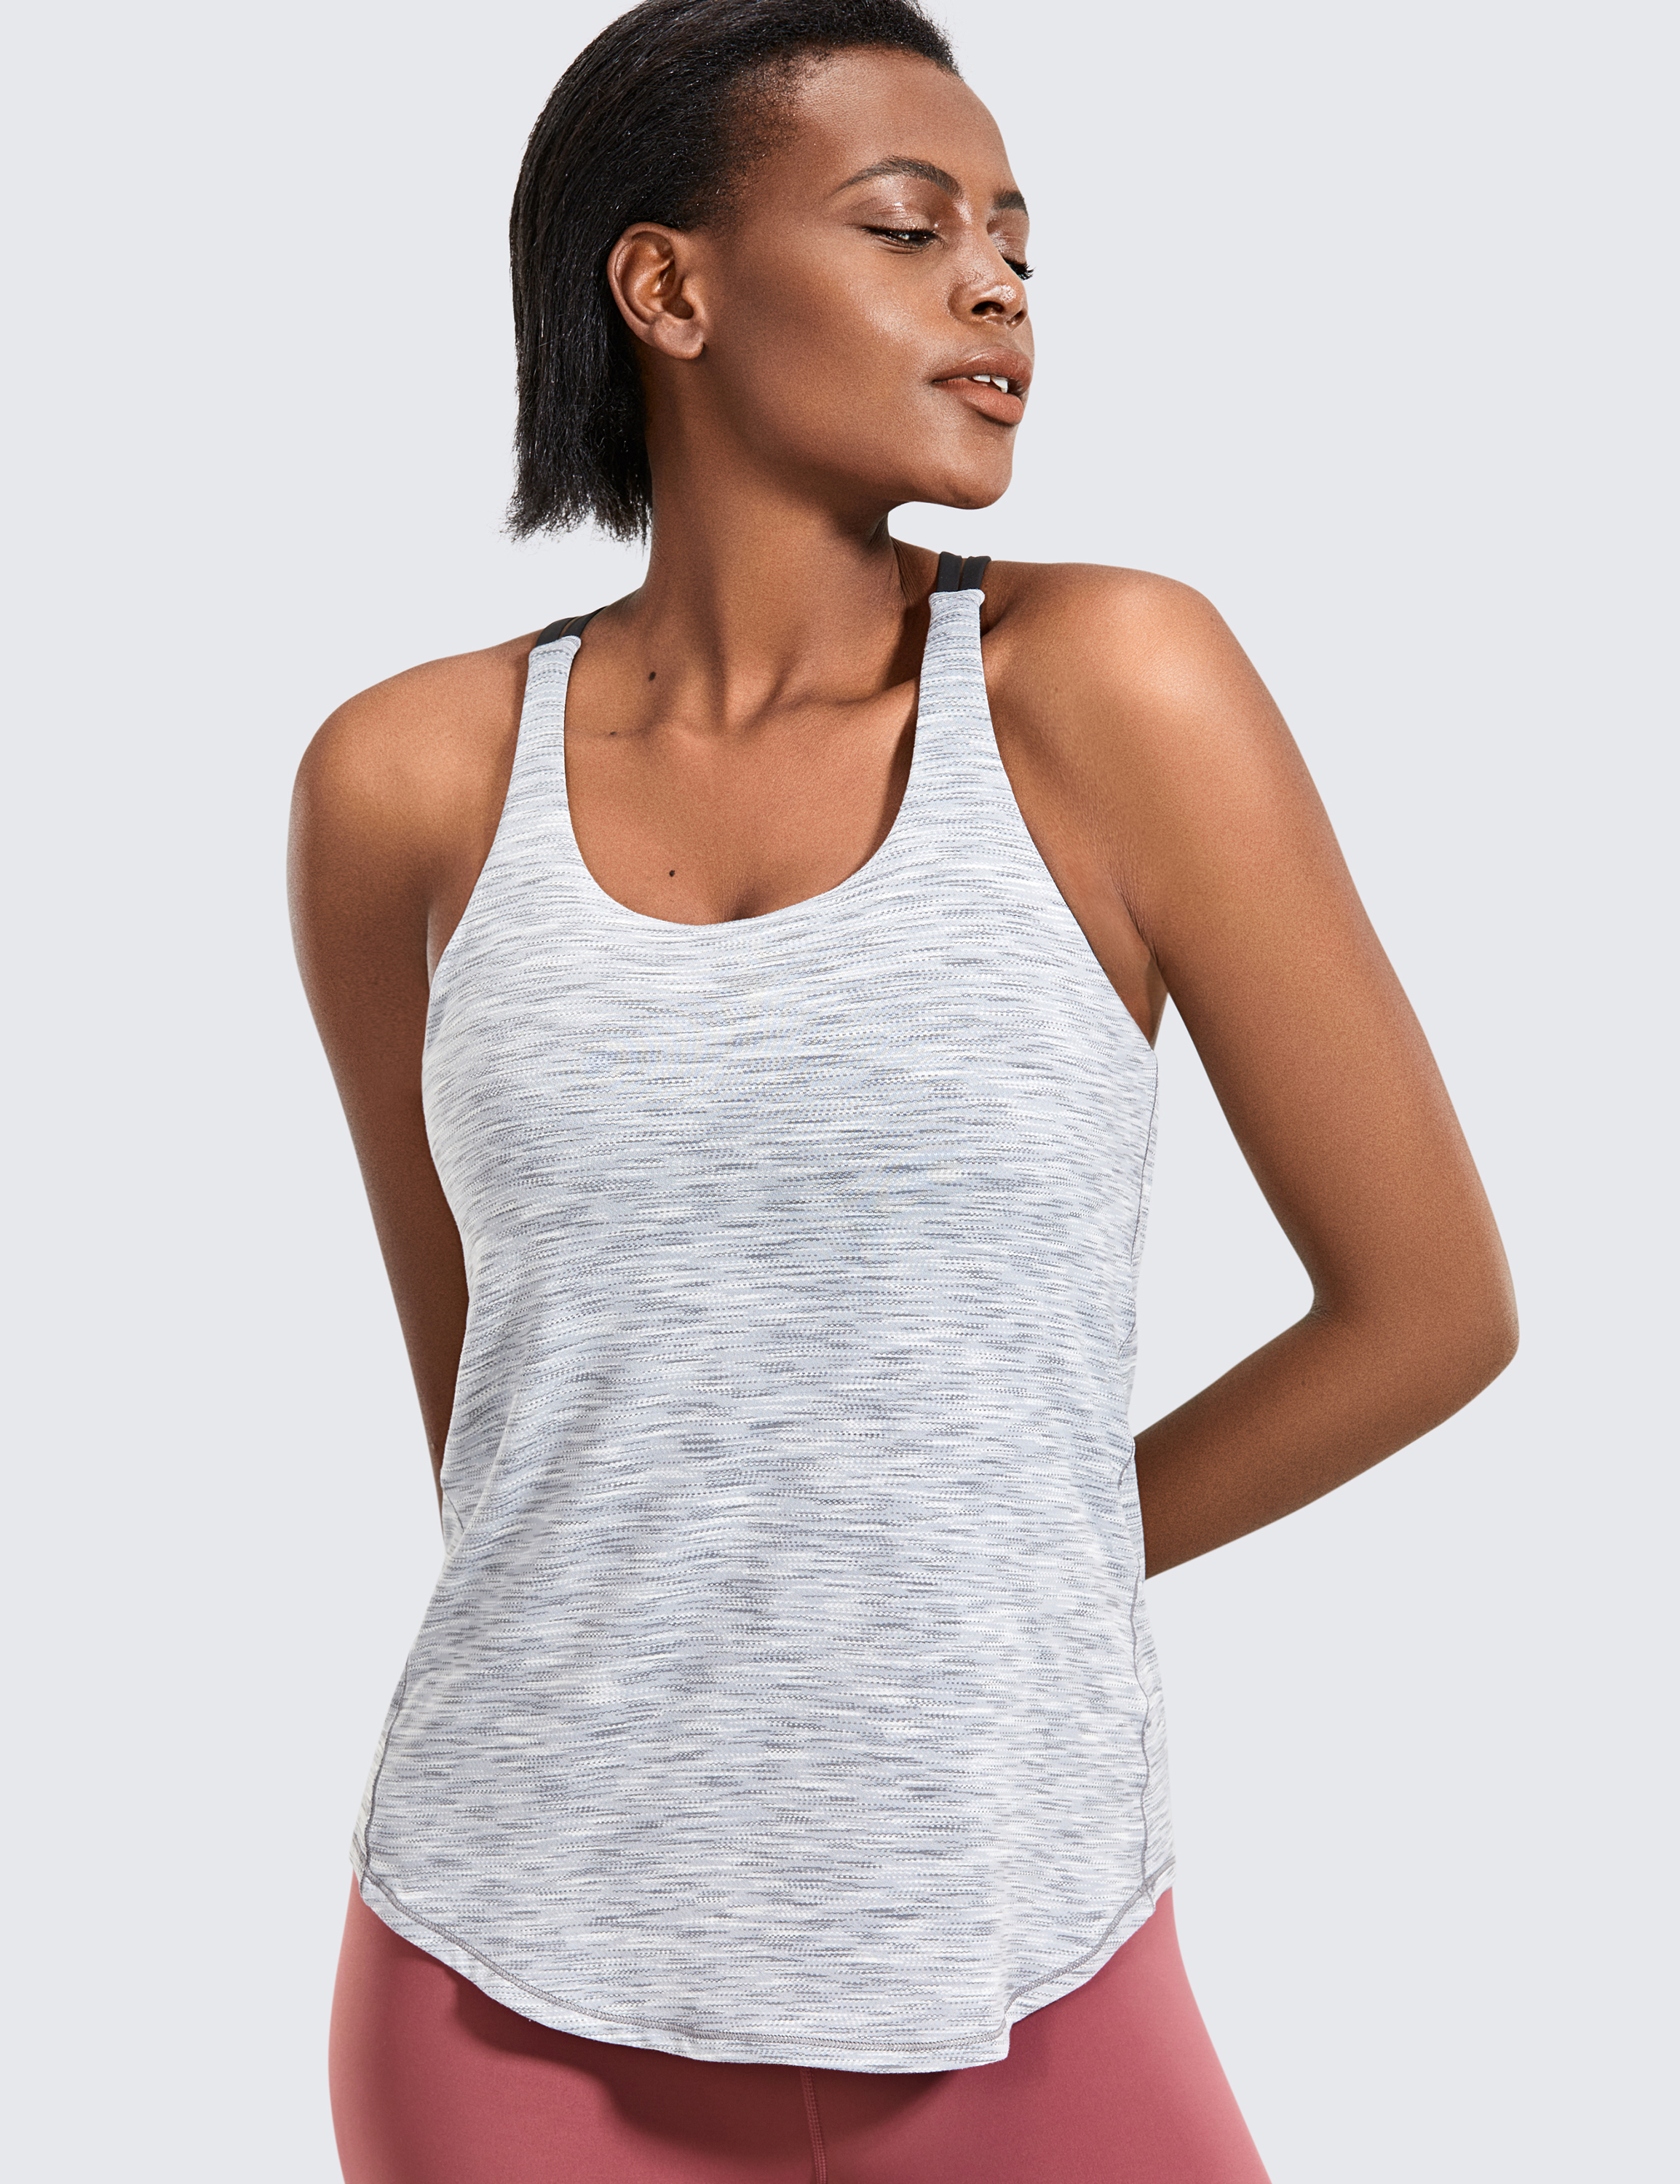 Tank-Top-with-Built-in-Bra-Yoga-Tops-for-Women-Workout-Tops